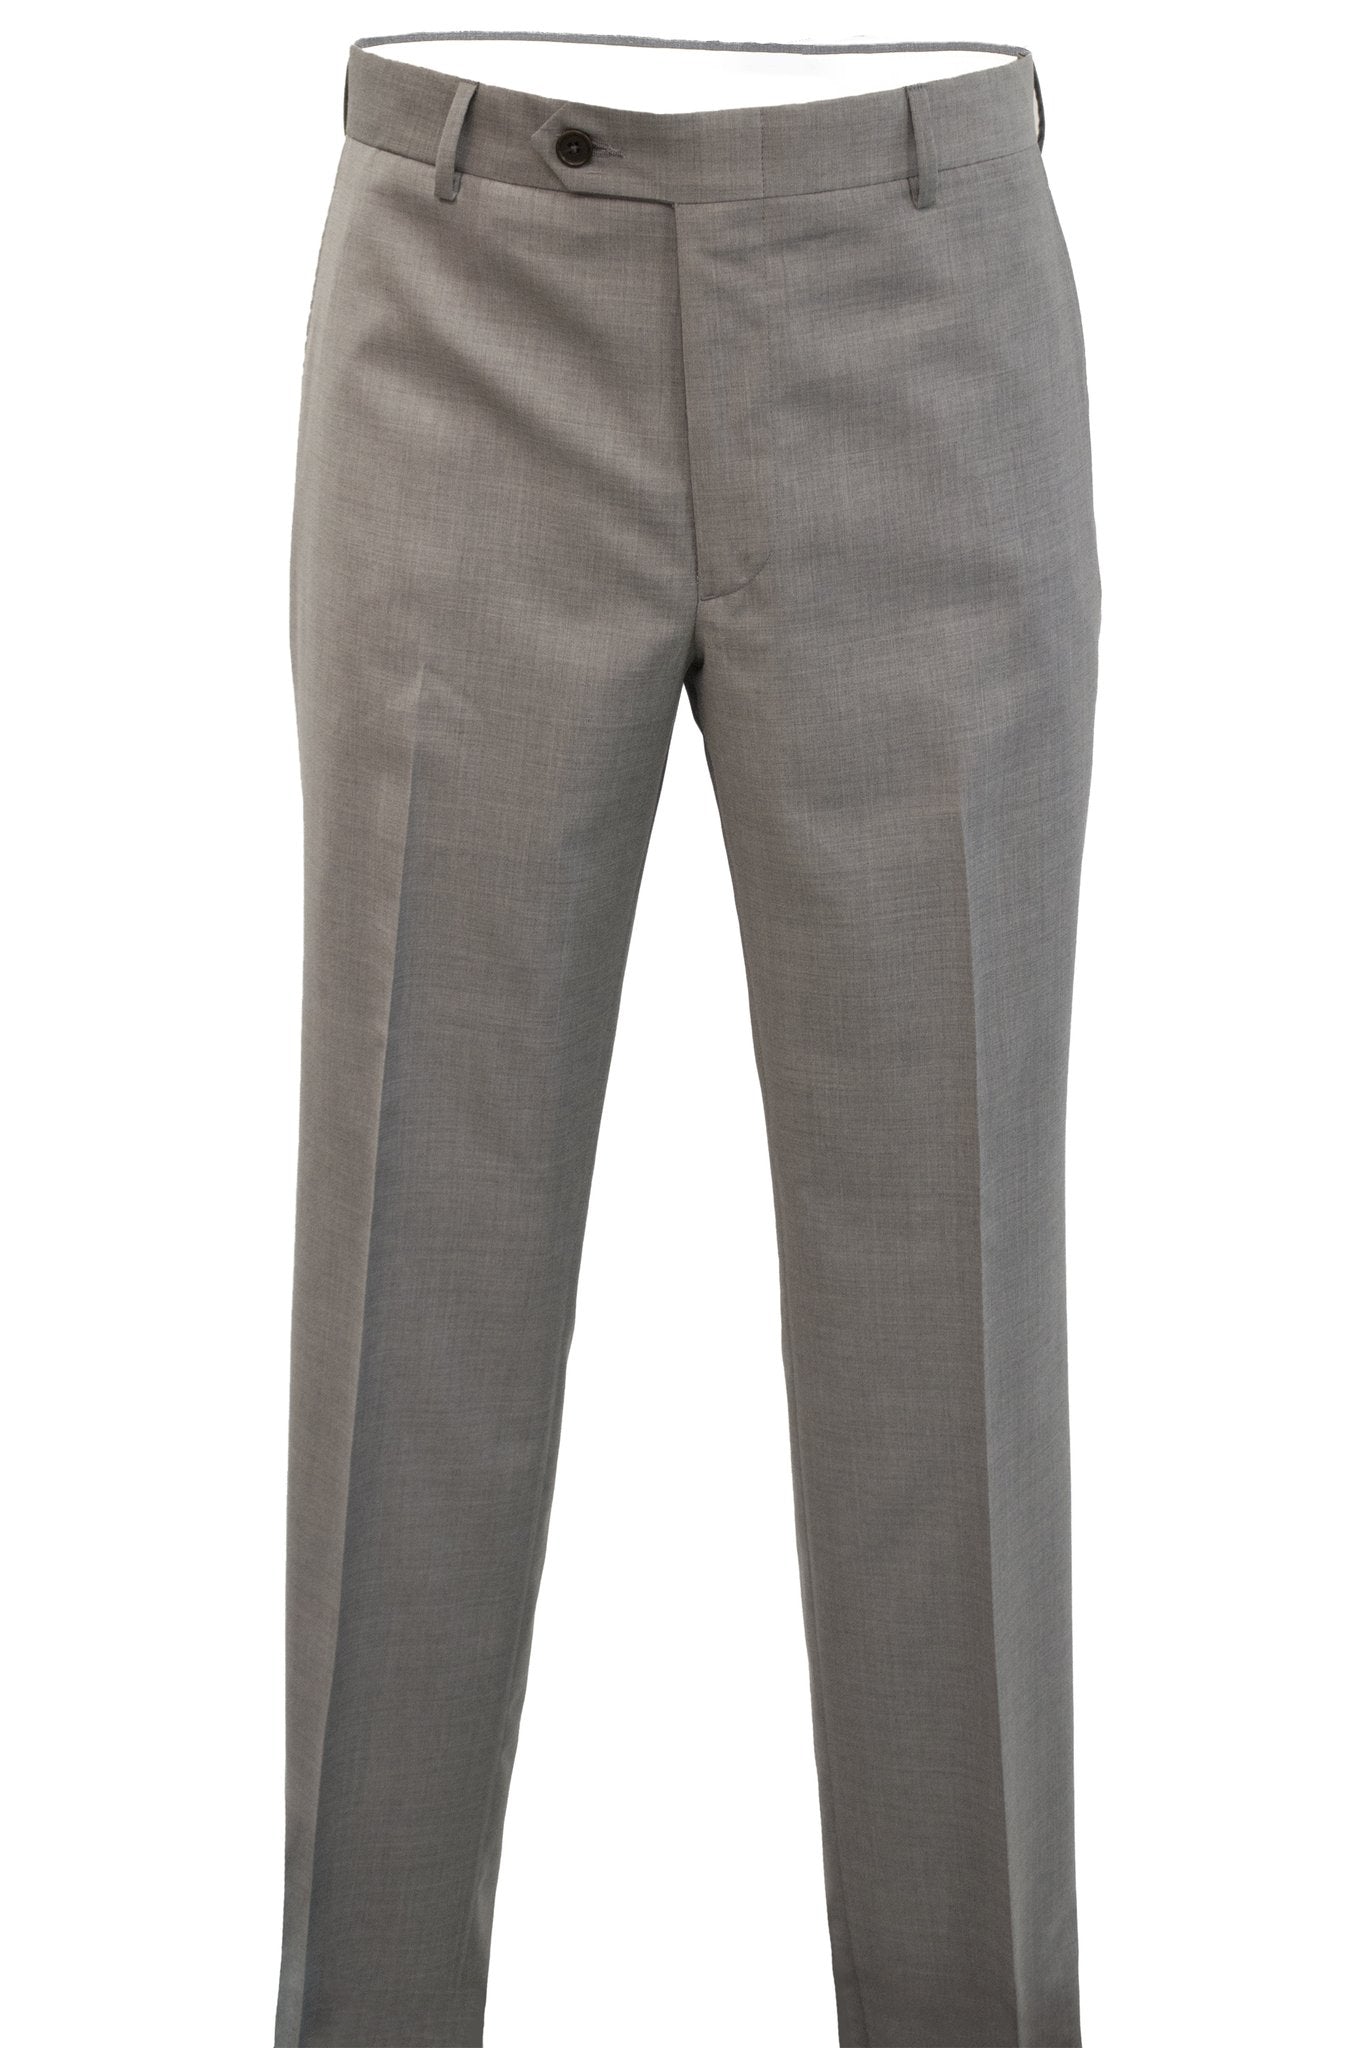 Charcoal Wool Dress Pant - Custom Fit Tailored Clothing